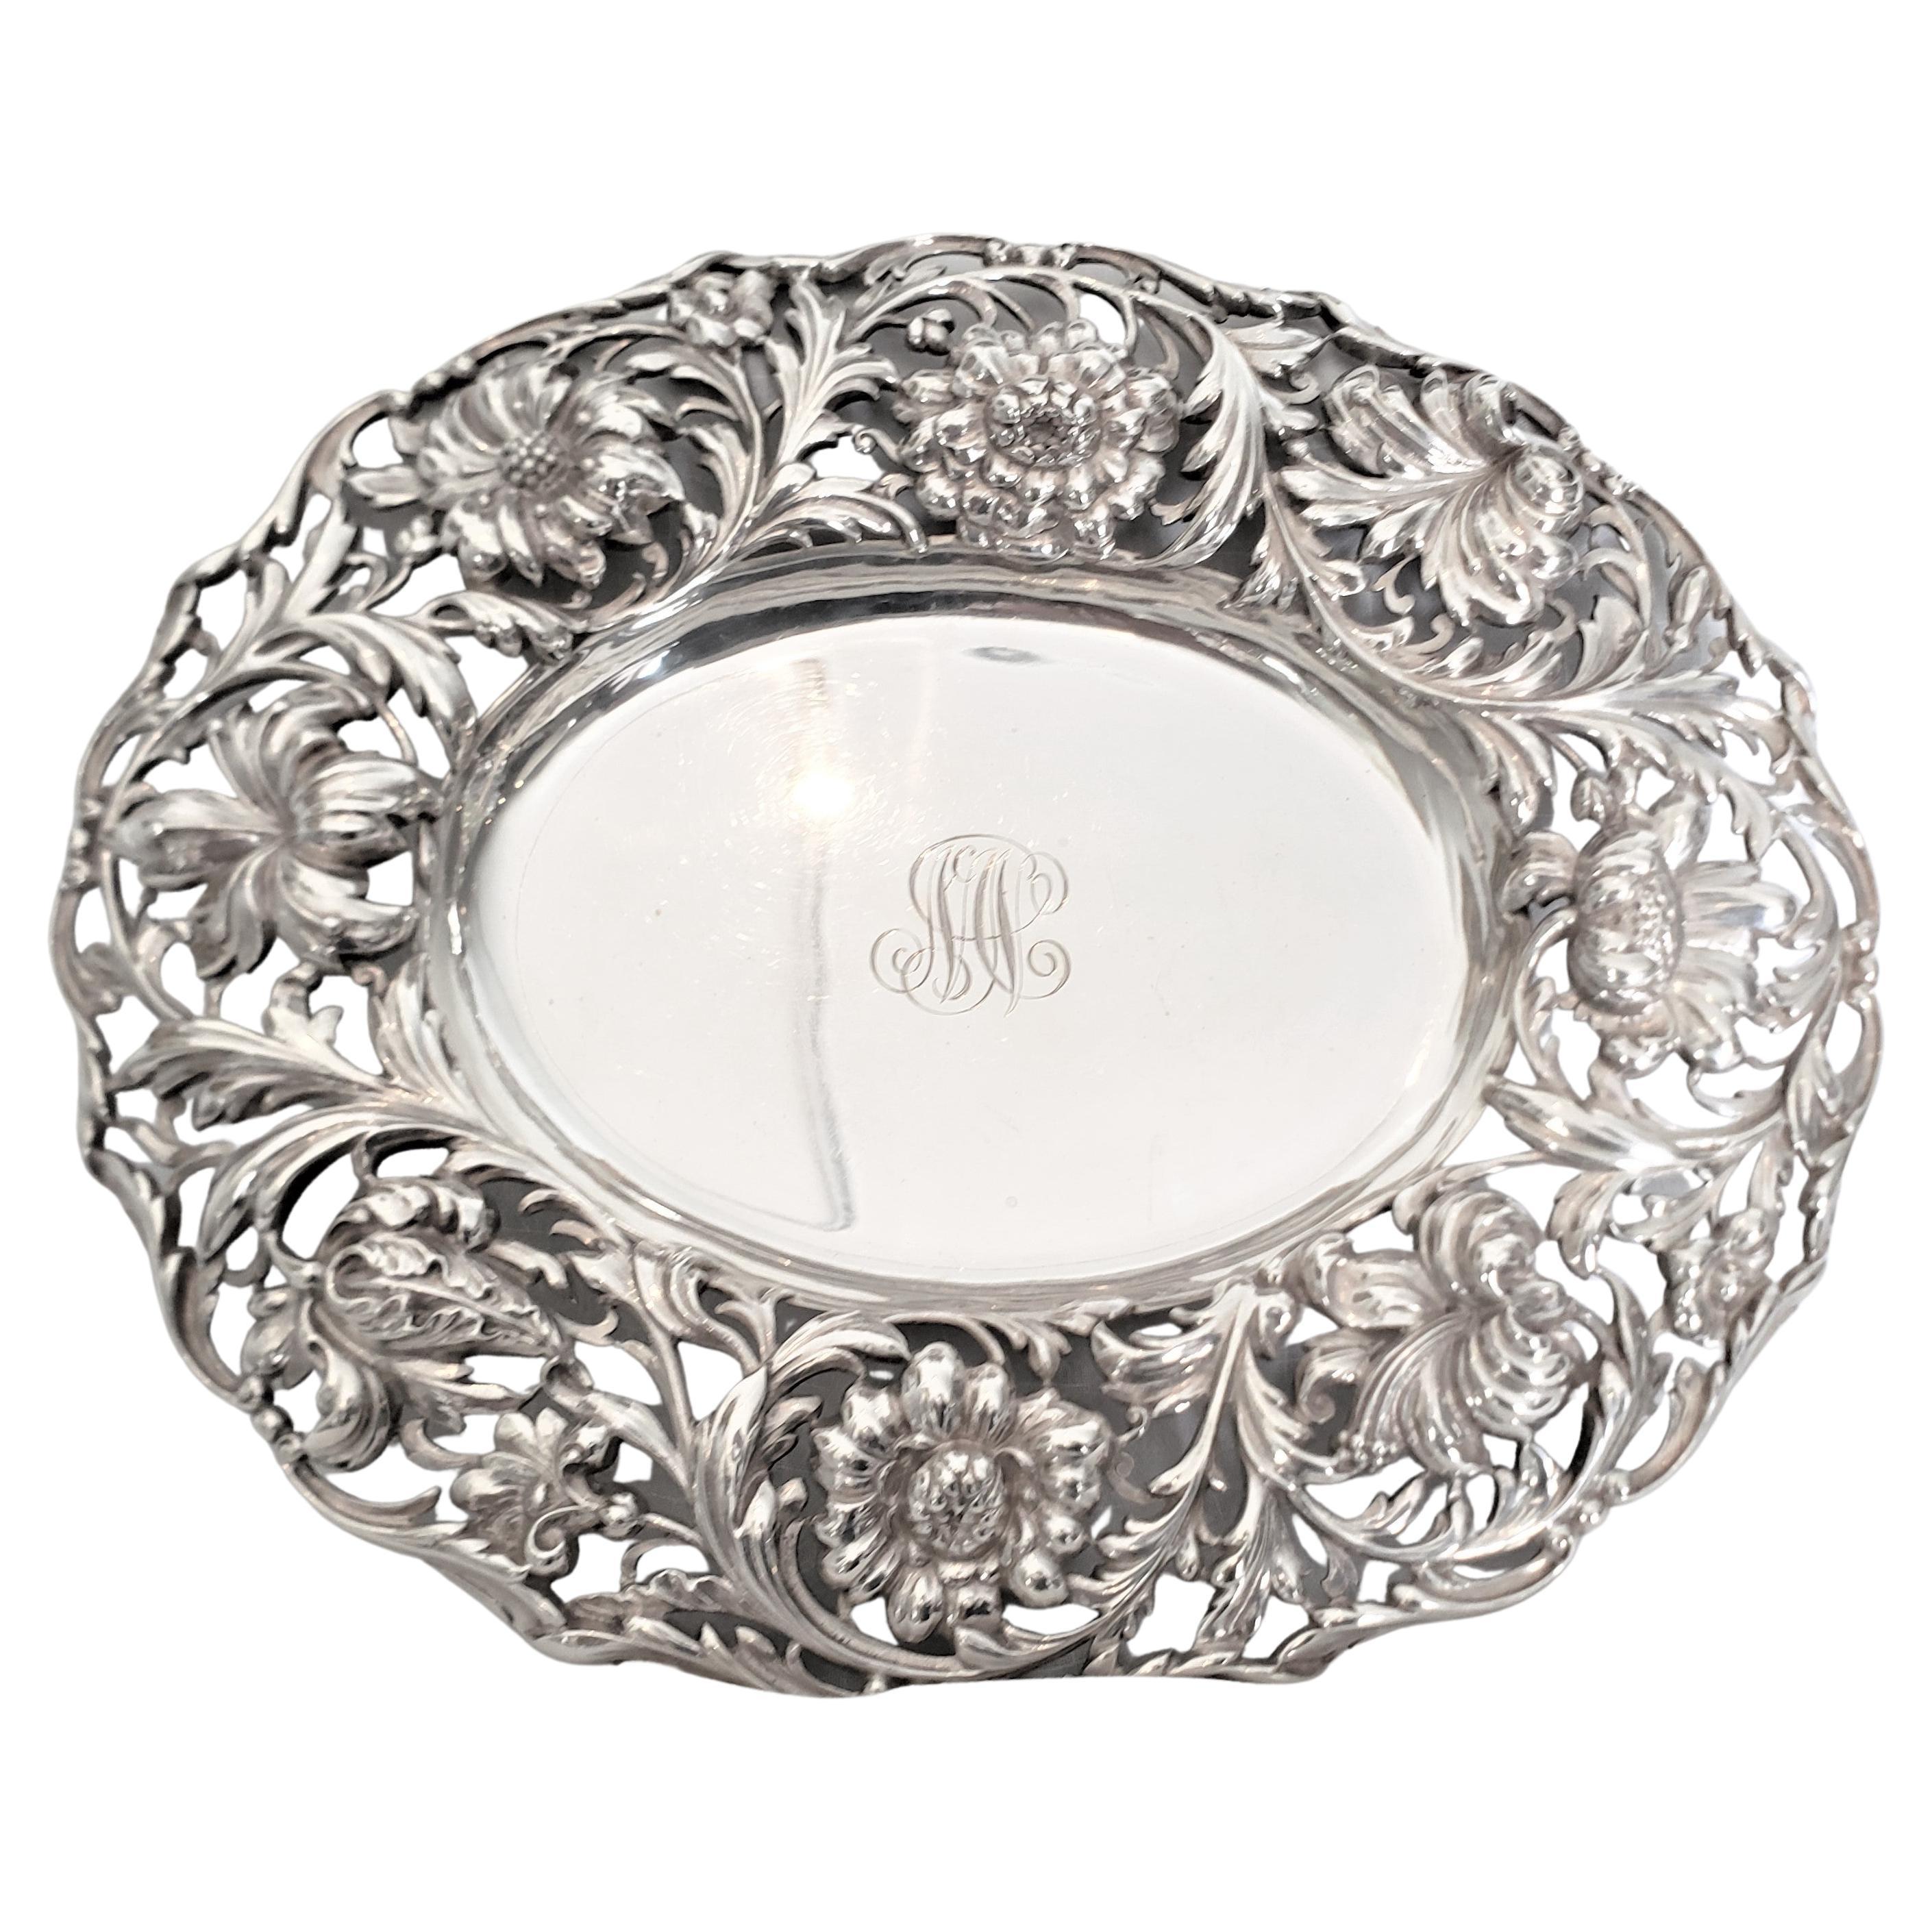 American Antique Signed Tiffany & Co. Sterling Silver Serving Dish with Floral Decoration For Sale